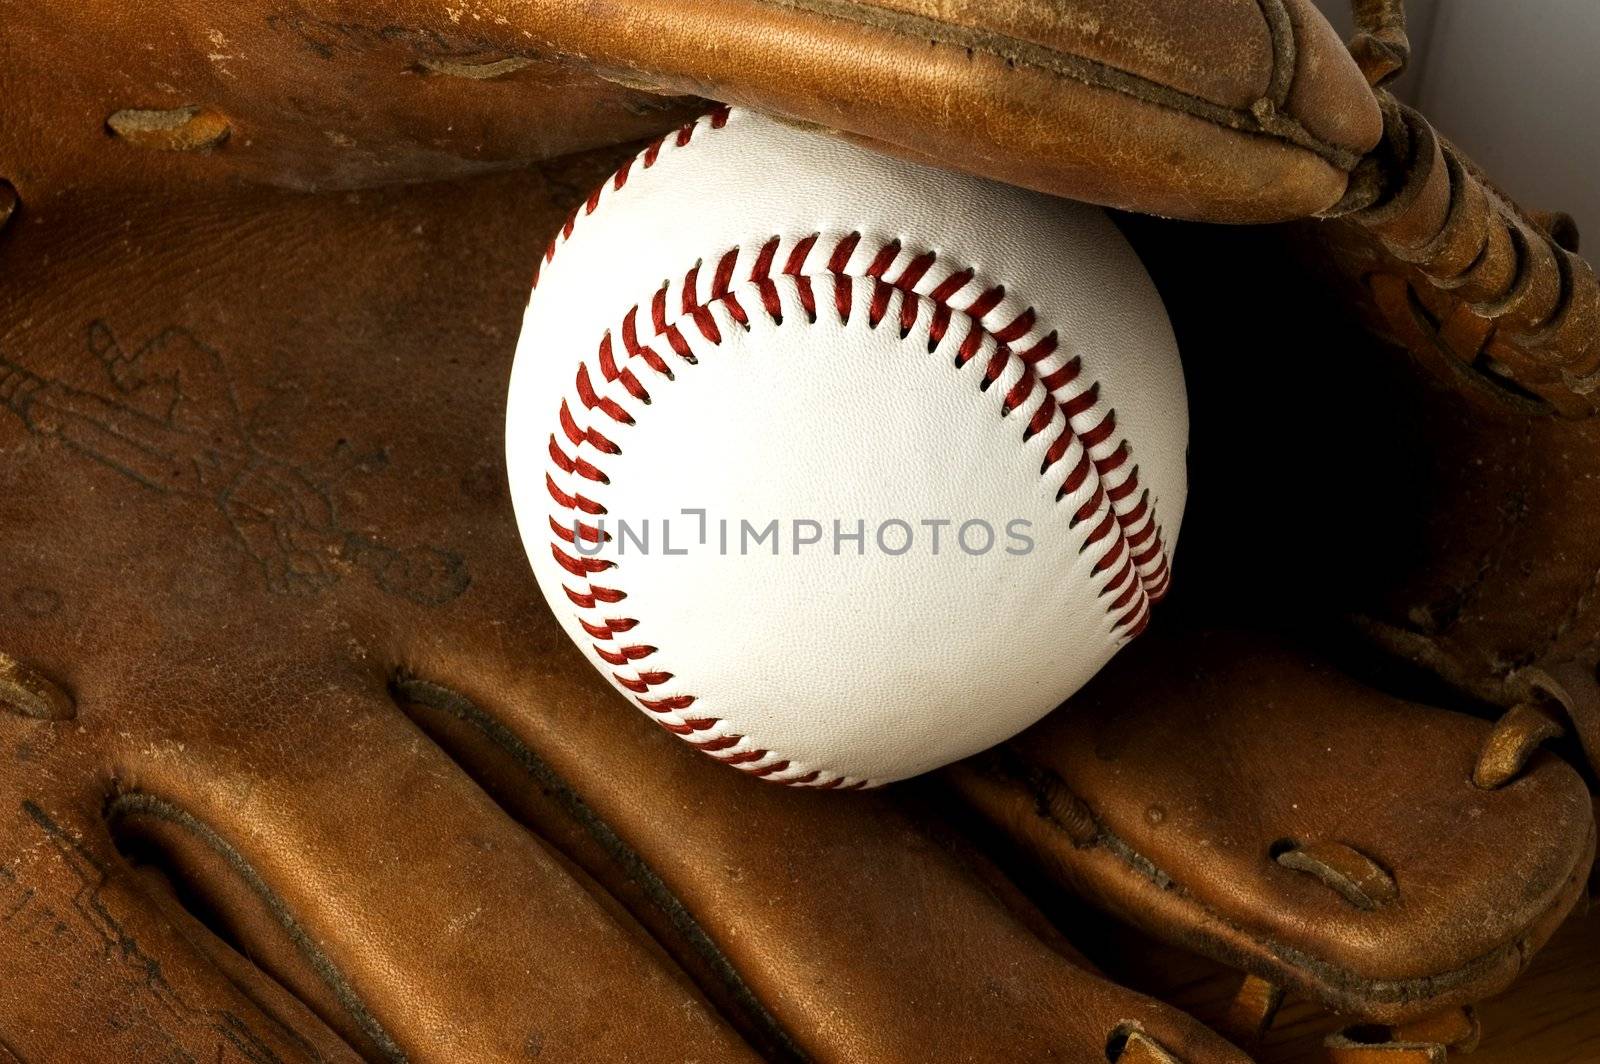 Baseball and old glove, detail.